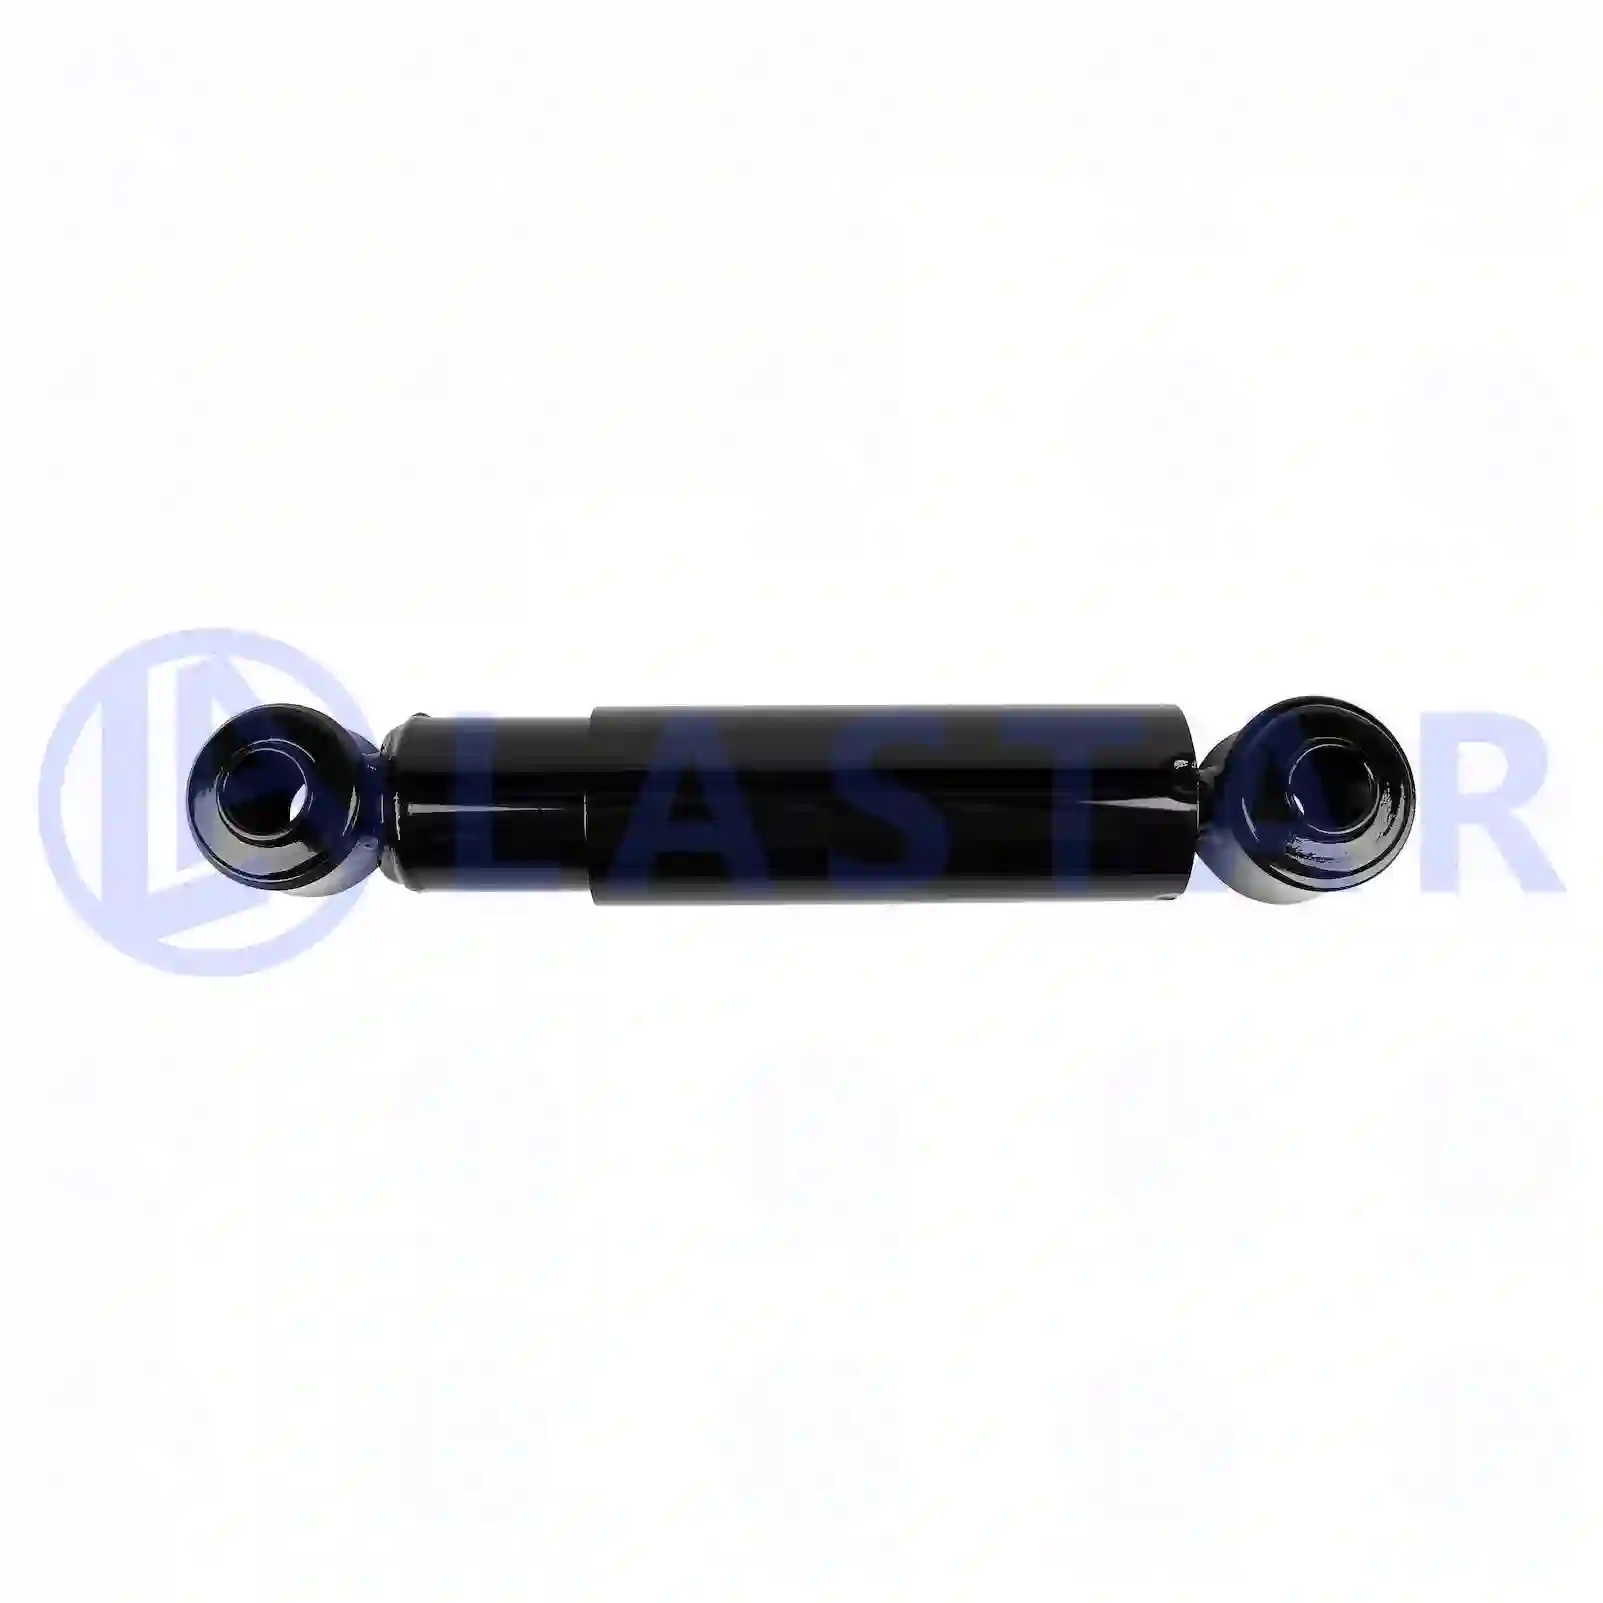 Shock absorber, 77727761, 1336823, 1336827, 708404174, 8404174, 5000790689, 21208363, 21216058, 21224034, 2376000500, 2376000600, 2376000800, 2376001000 ||  77727761 Lastar Spare Part | Truck Spare Parts, Auotomotive Spare Parts Shock absorber, 77727761, 1336823, 1336827, 708404174, 8404174, 5000790689, 21208363, 21216058, 21224034, 2376000500, 2376000600, 2376000800, 2376001000 ||  77727761 Lastar Spare Part | Truck Spare Parts, Auotomotive Spare Parts